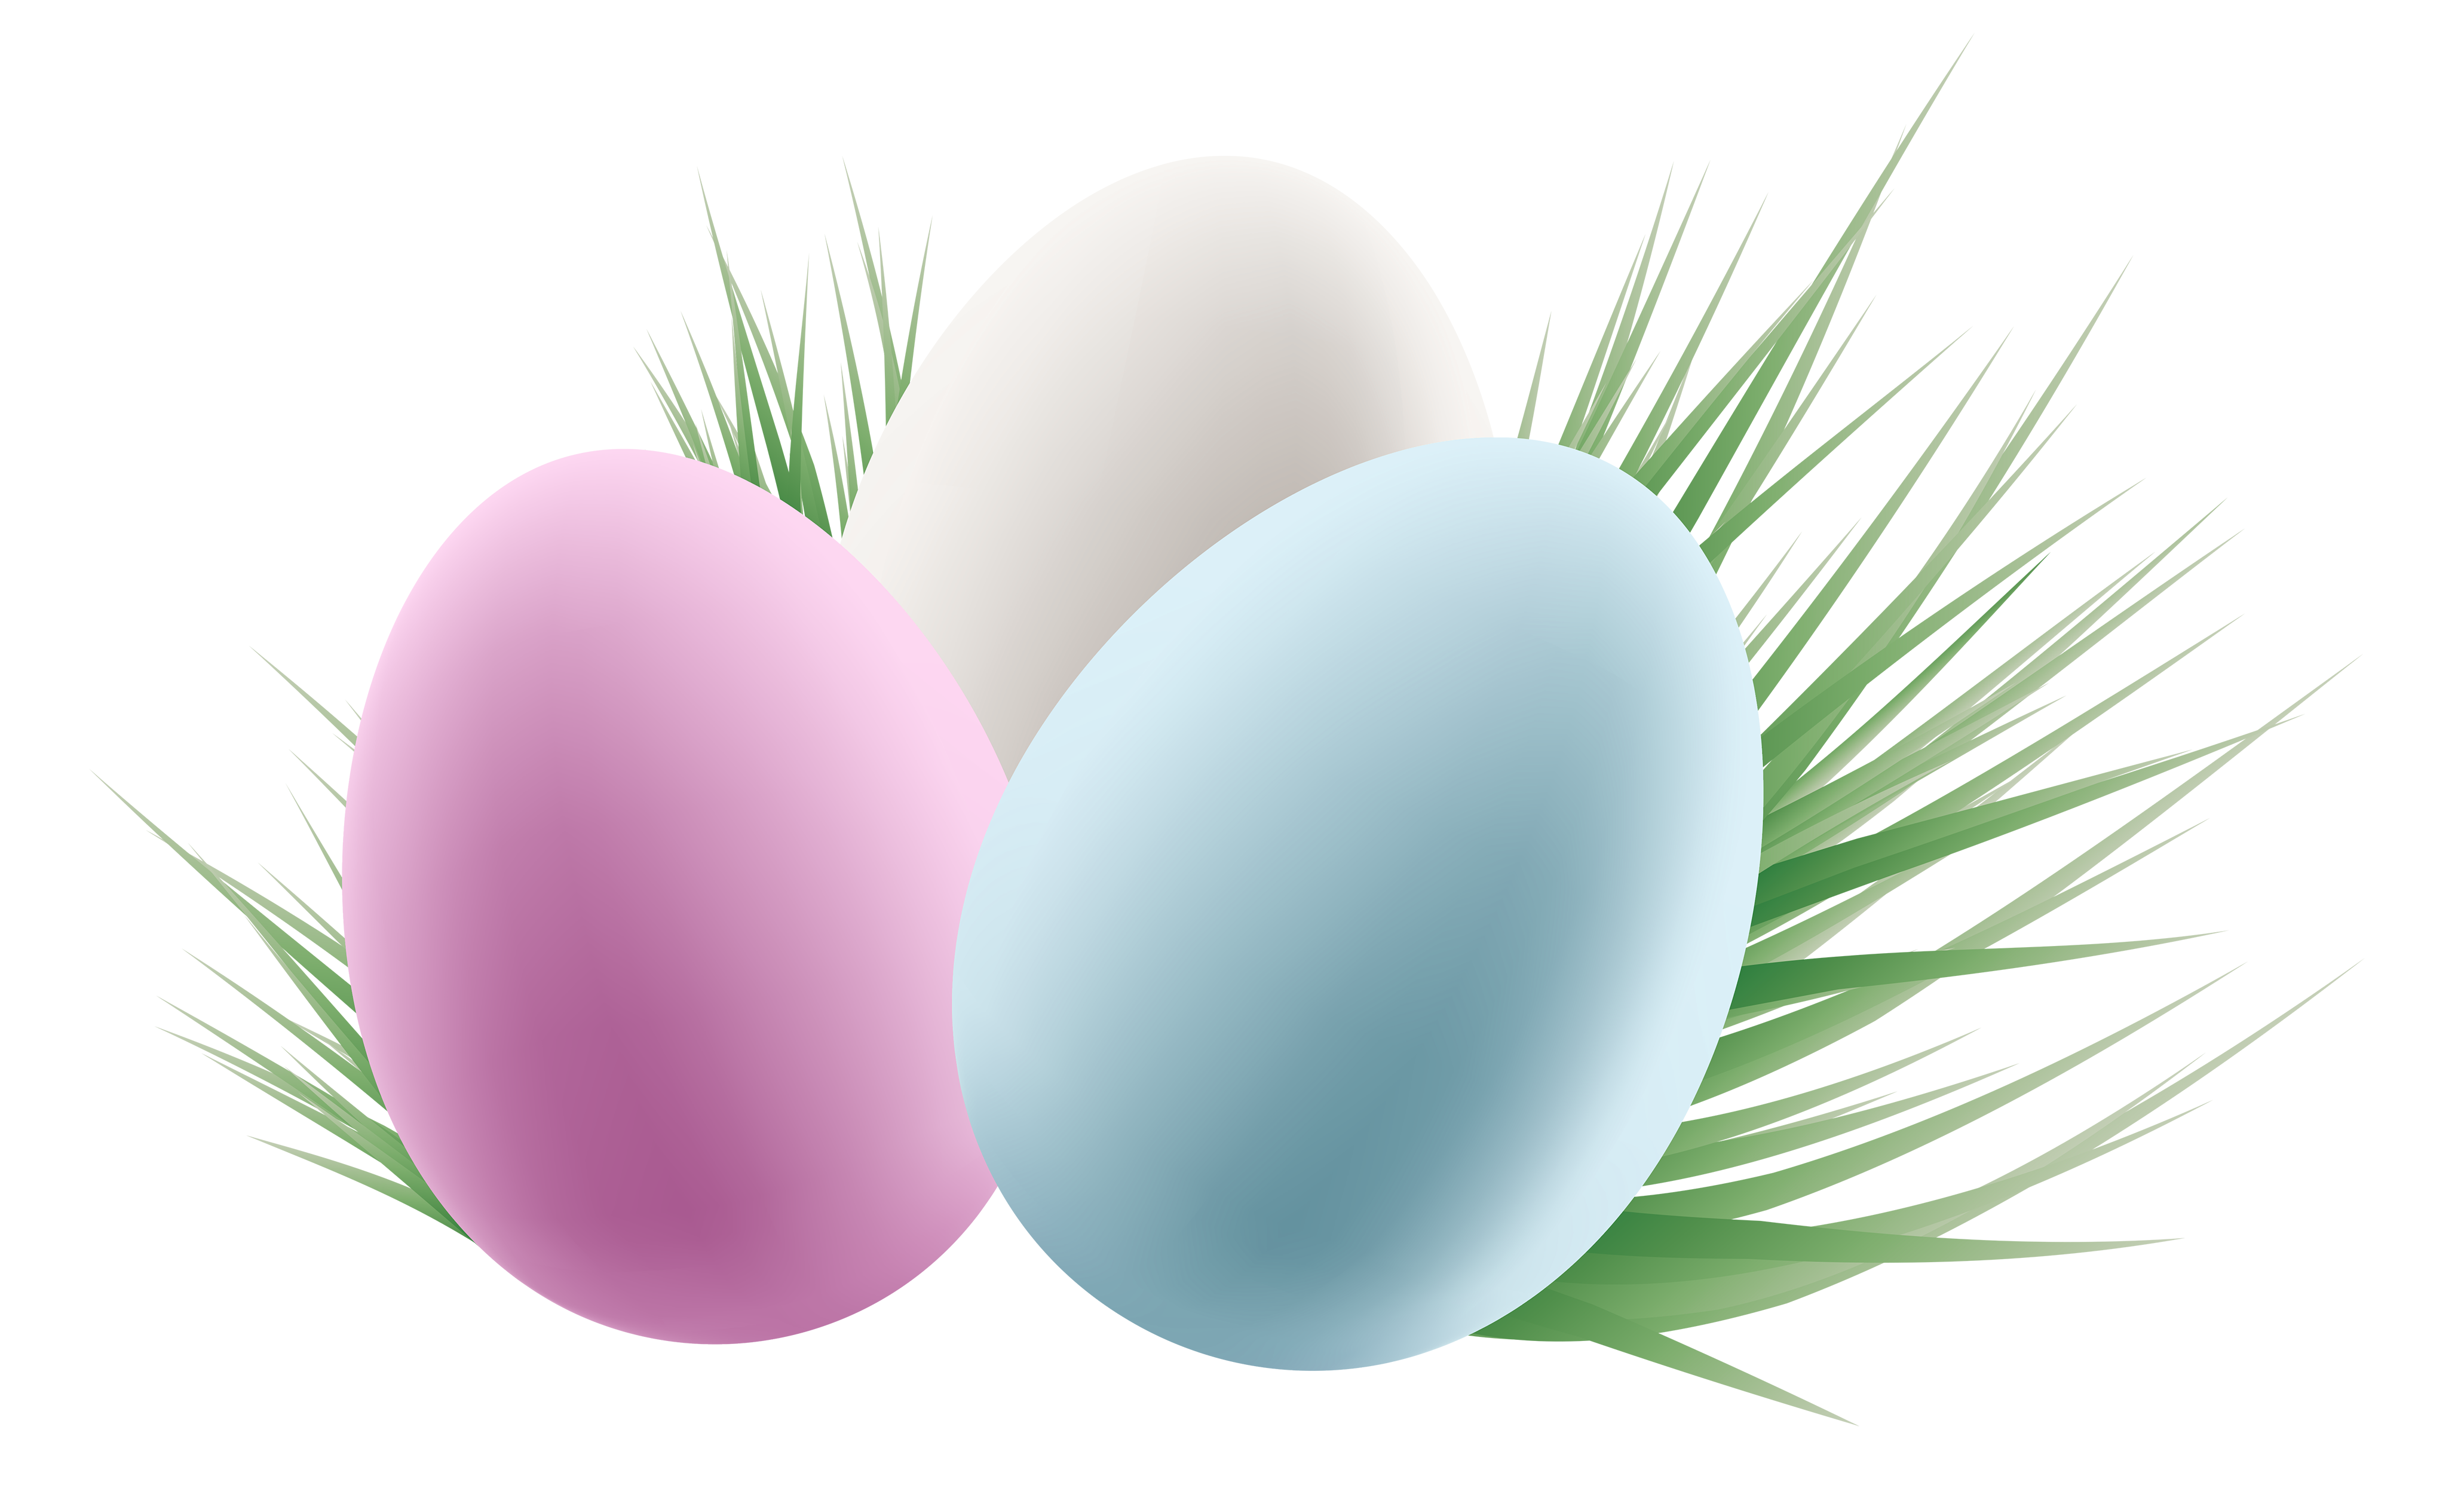 Easter Eggs Clipart, PNG - Transparent Background (2474779)